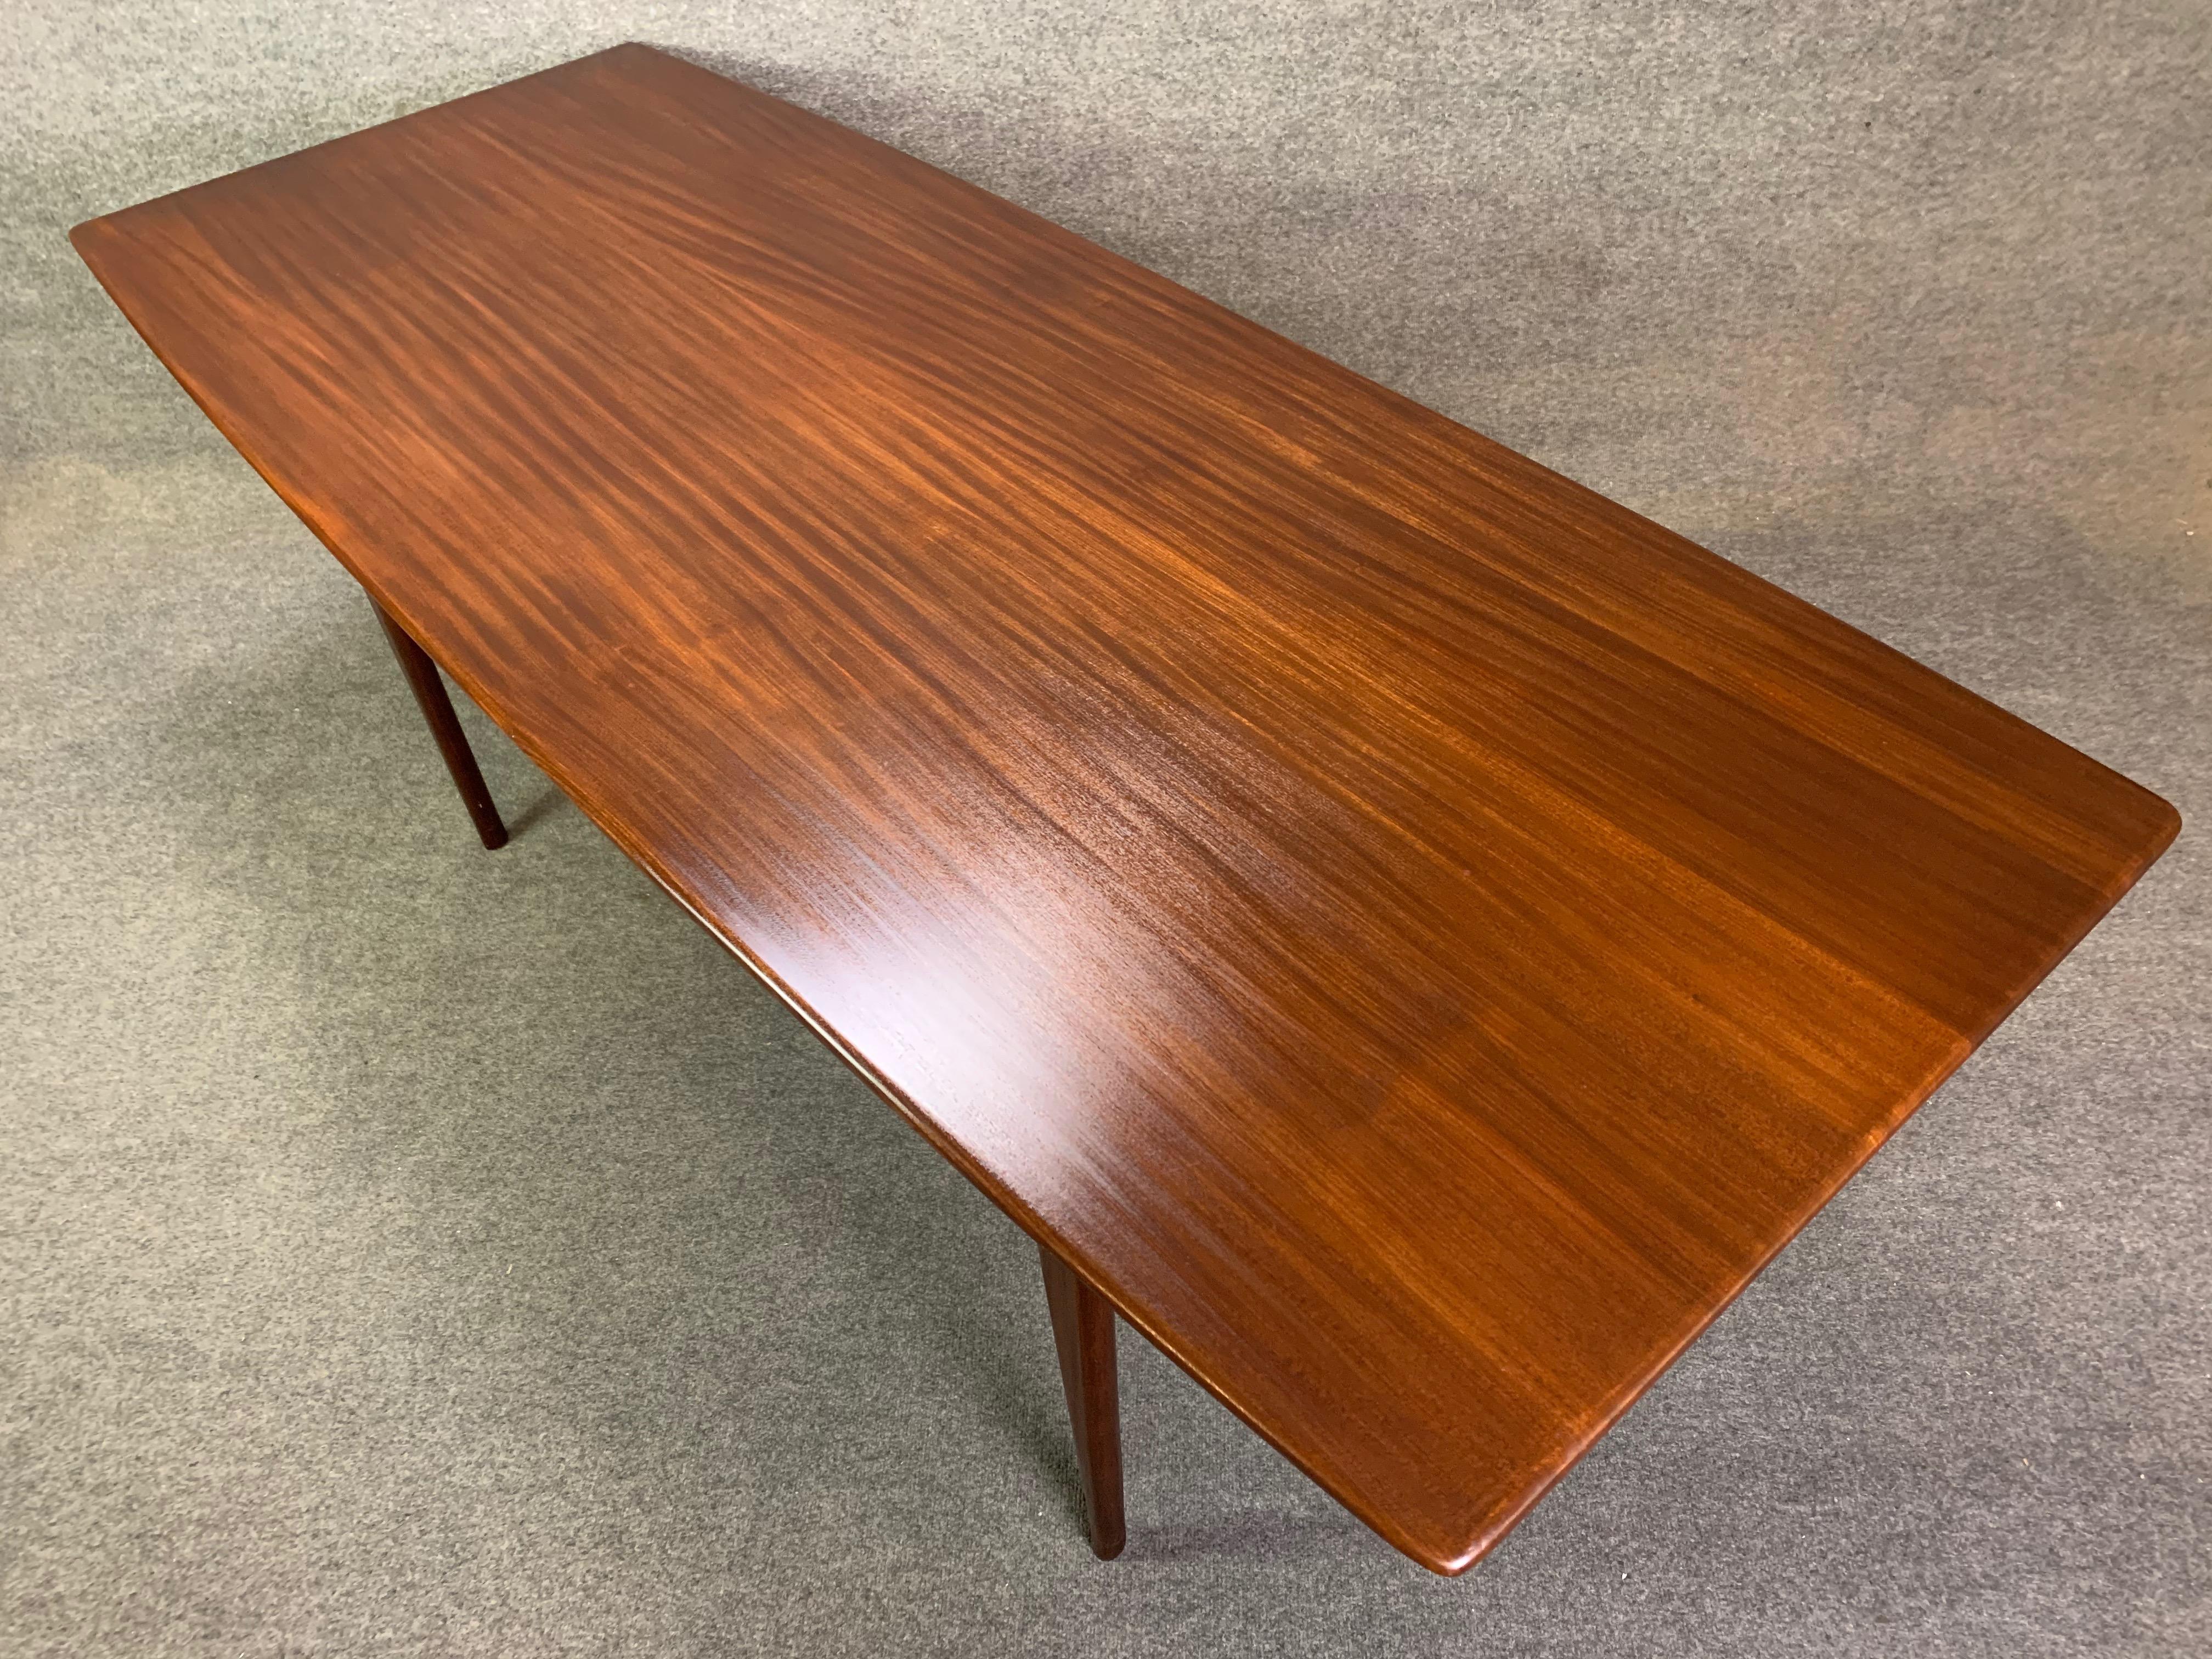 English Vintage Midcentury Teak Dining Table Attributed to Richard Hornby & Fyne Ladye For Sale